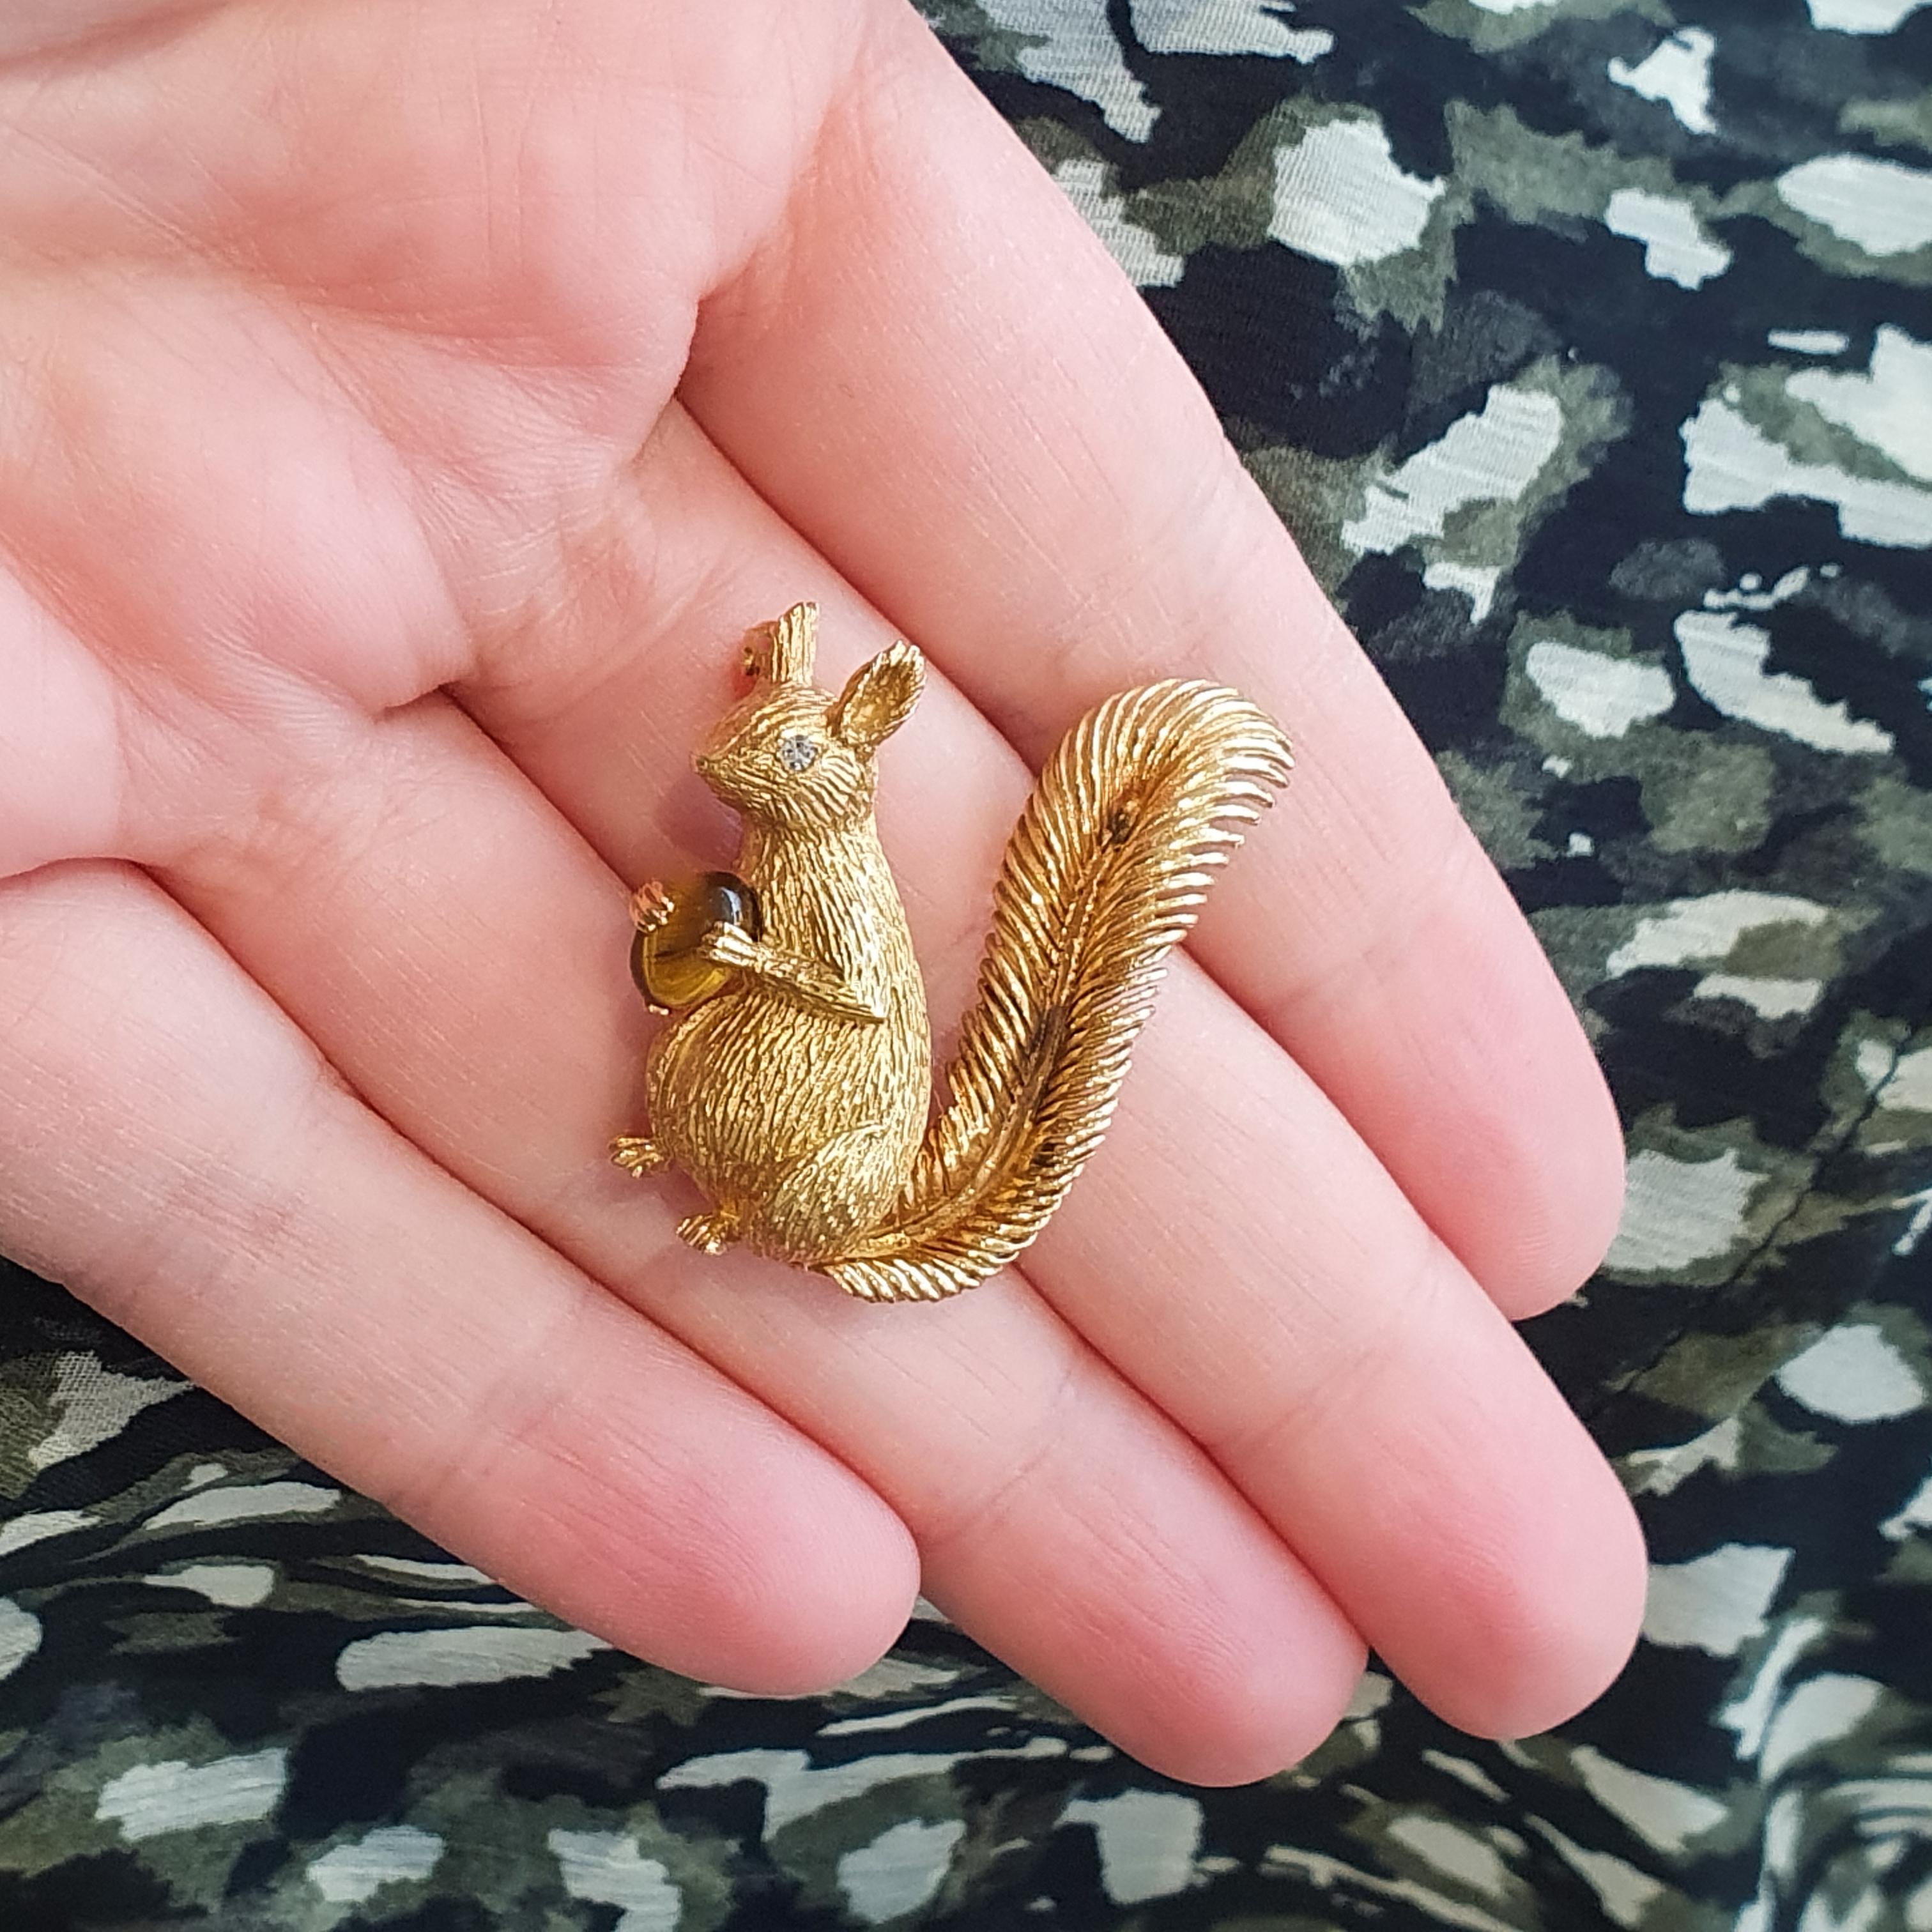 1960S French Tiger's Eye Cabochon on Yellow Gold 18k Squirrel Brooch Clip.

Total height: 1.38 inch (3.50 centimeters).
Total width: 1.50 inch (2.80 centimeters).
Total weight: 11.75 grams

The most elegant accessory you need to have.

Both